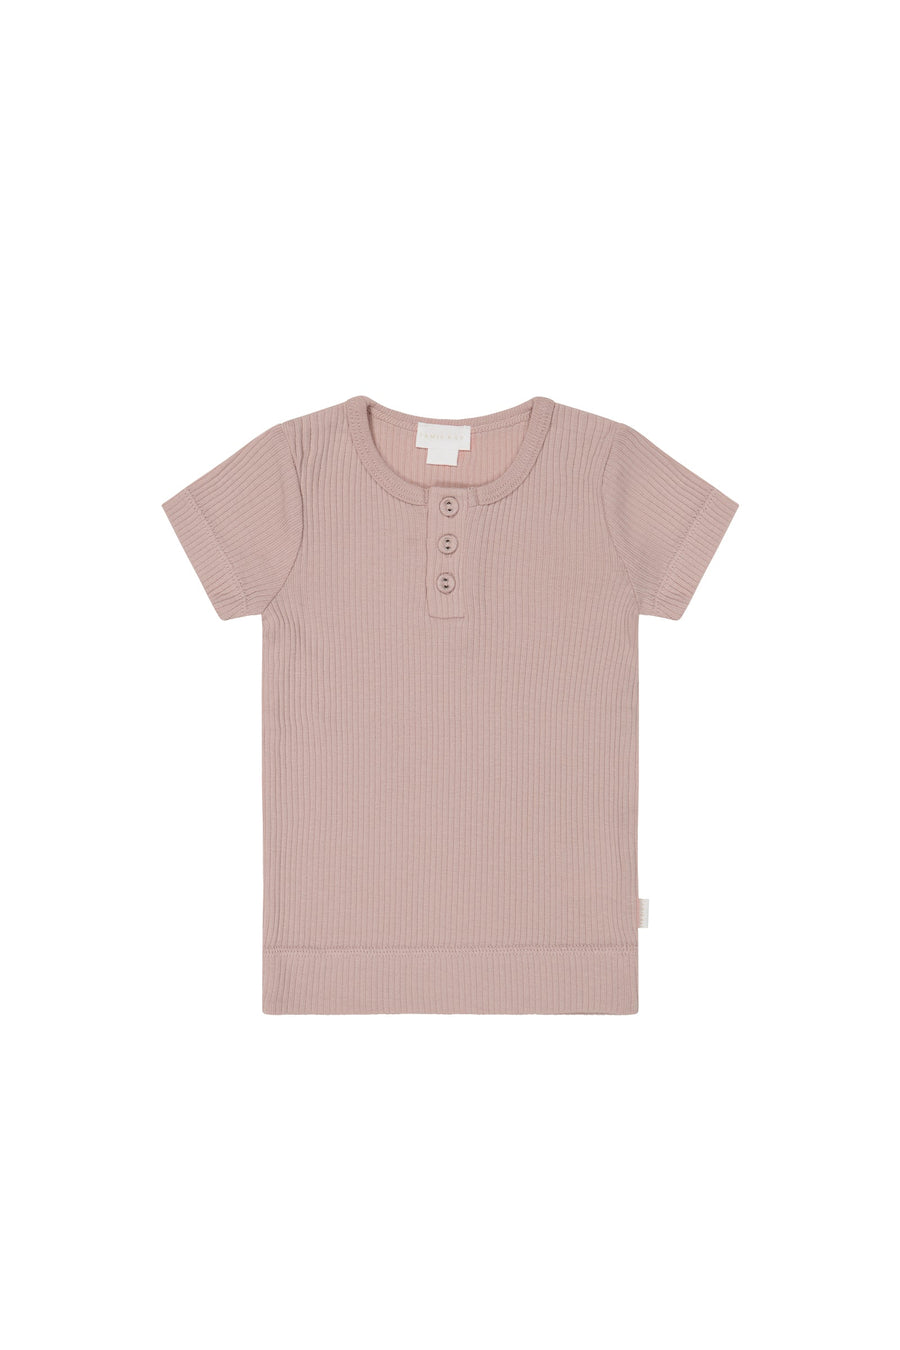 Organic Cotton Modal Henley Tee - Shell Pink Childrens Top from Jamie Kay USA